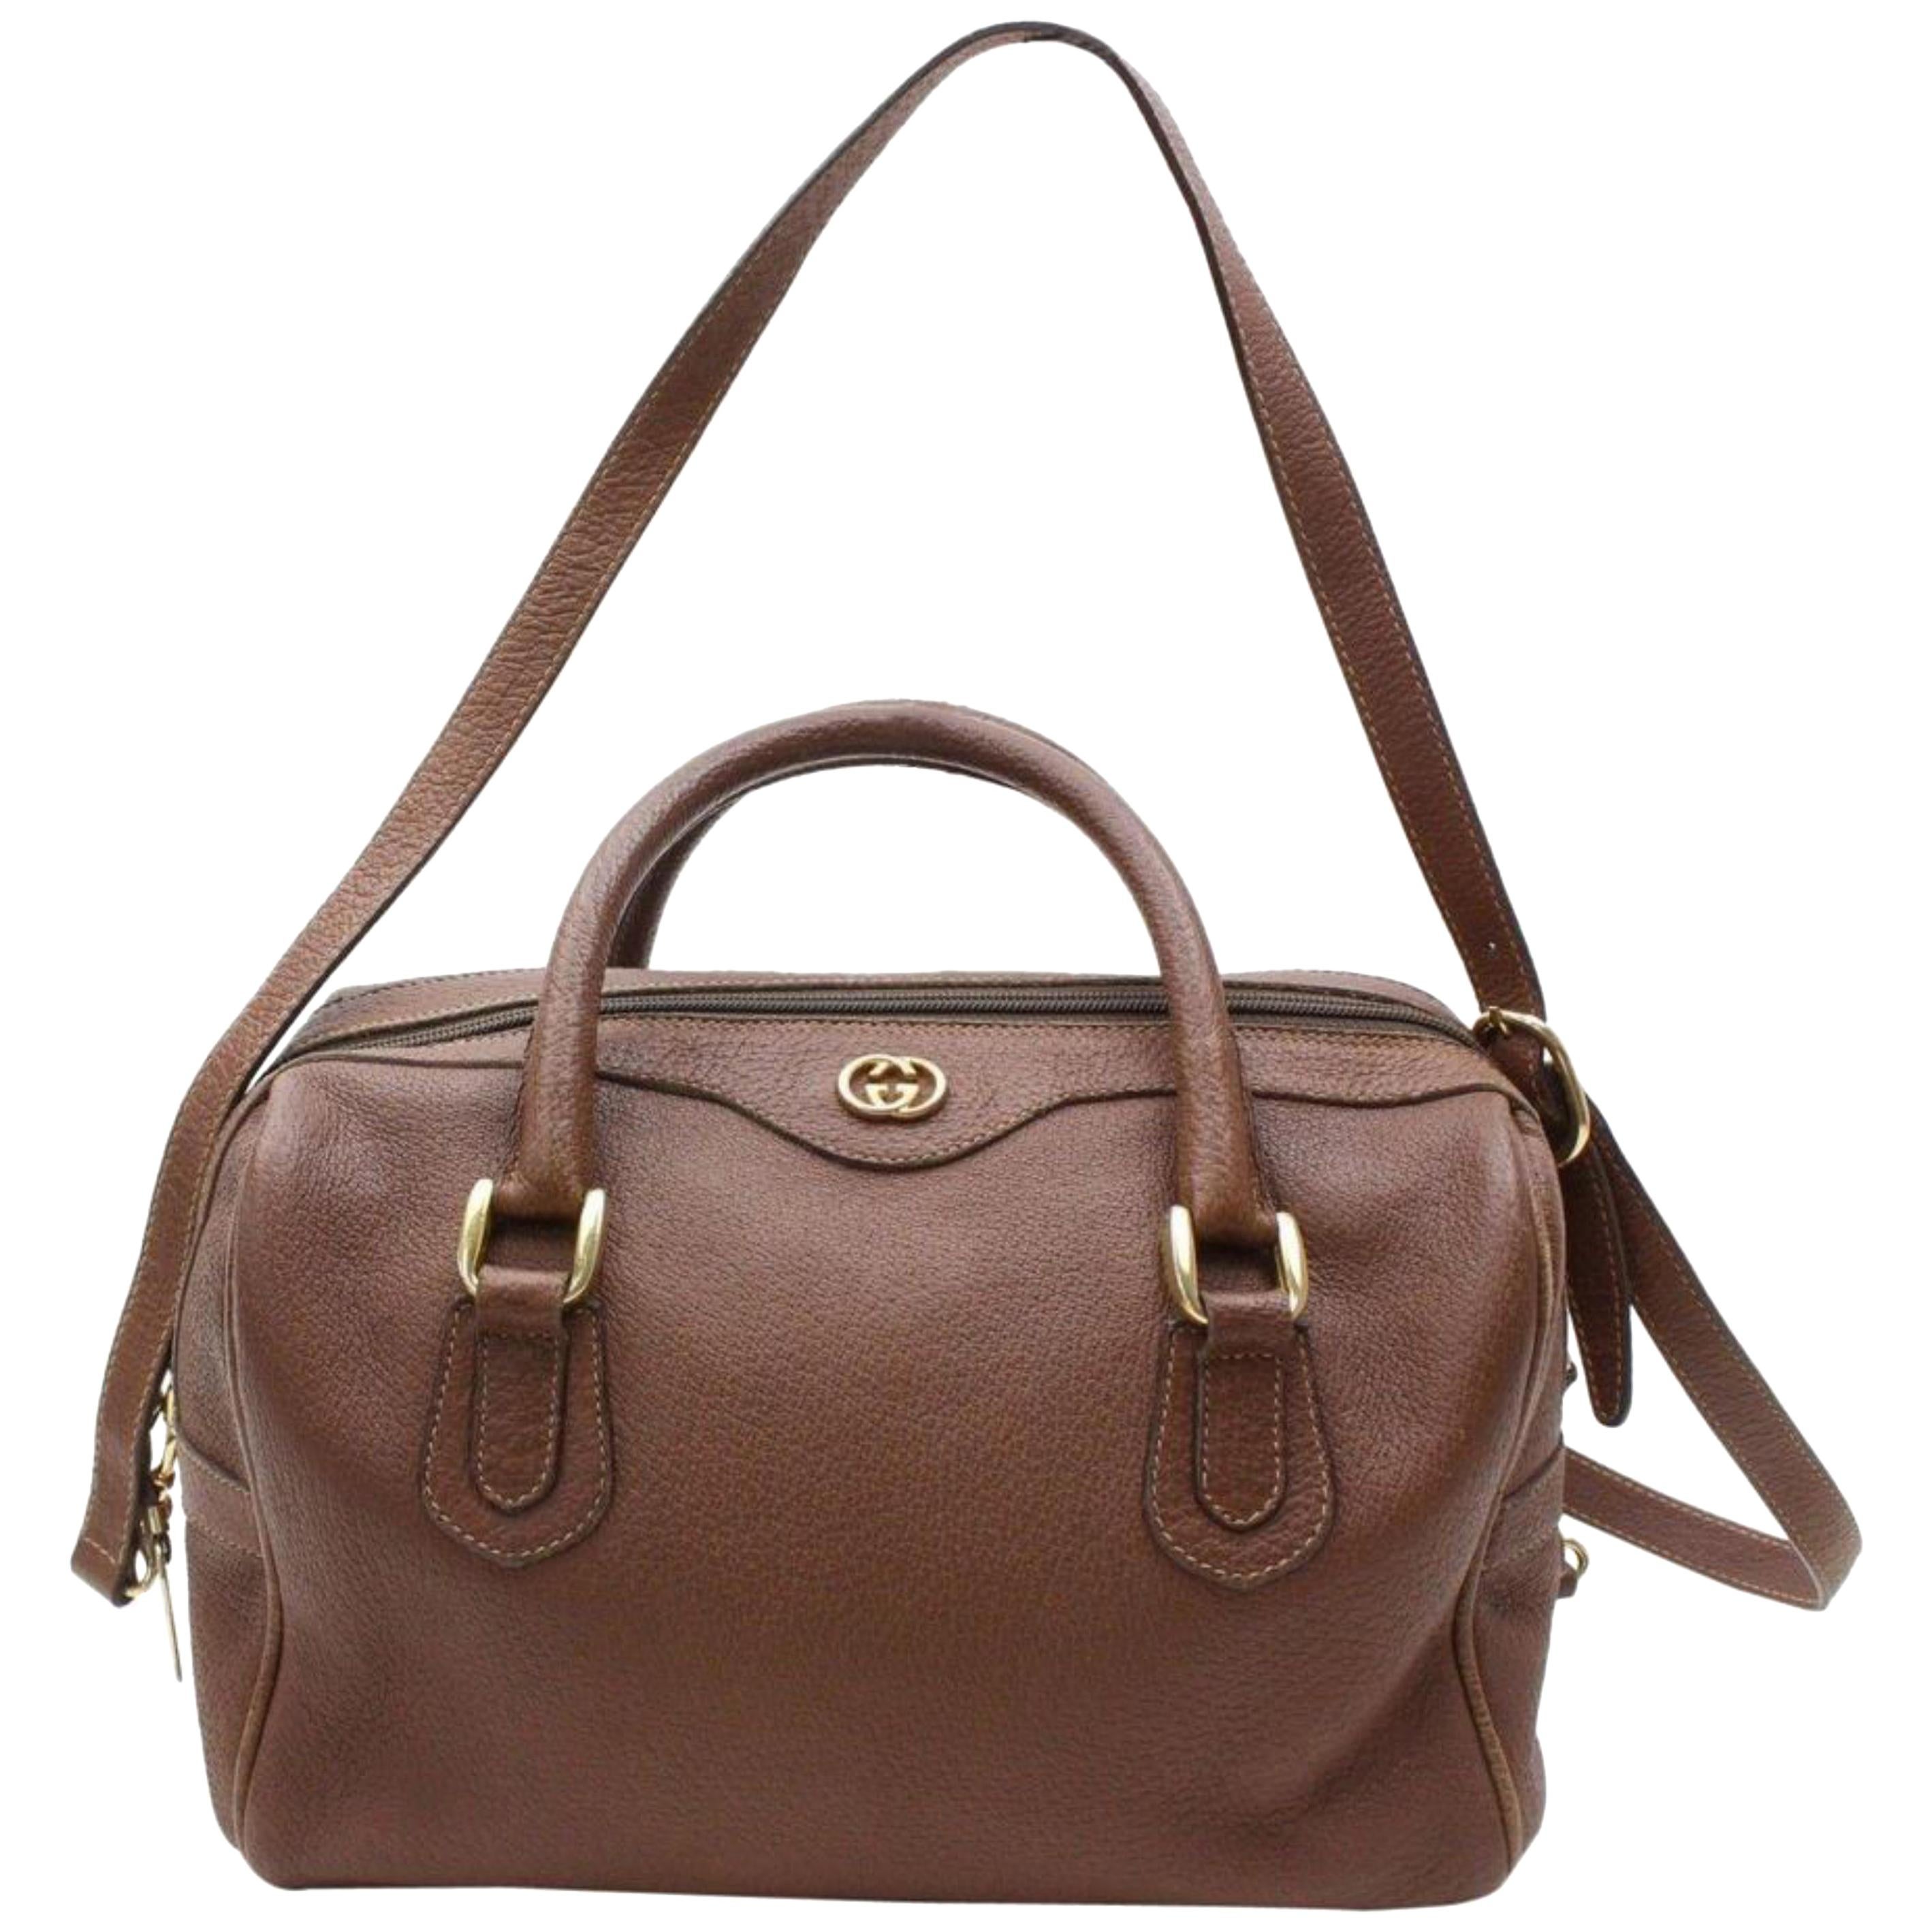 Gucci Boston With Strap 868550 Brown Leather Shoulder Bag For Sale